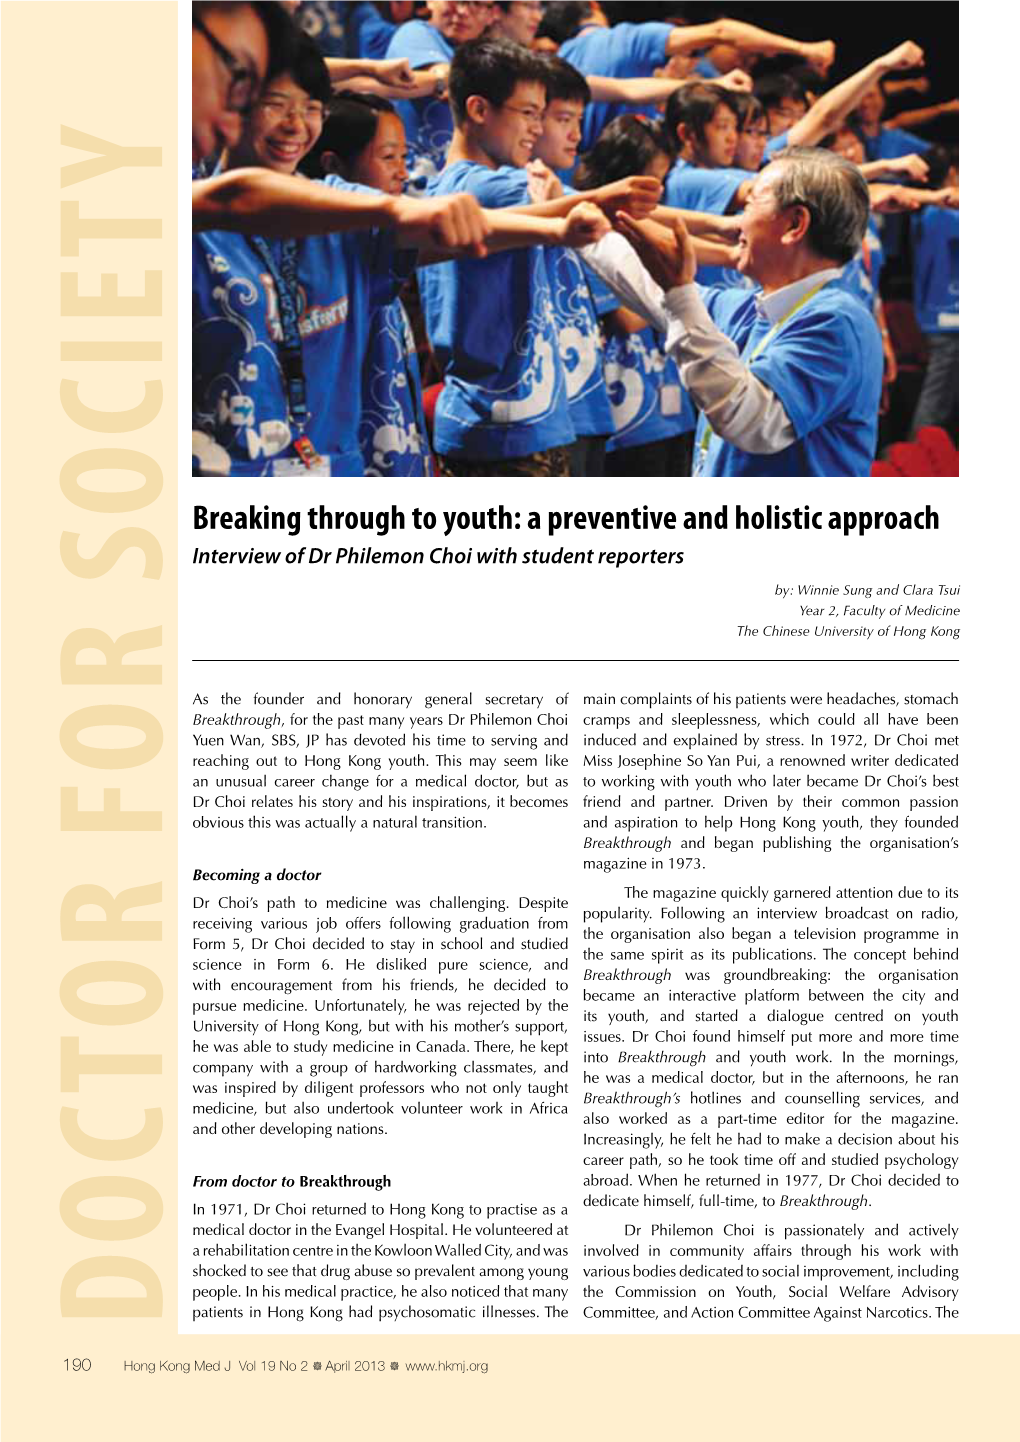 Breaking Through to Youth: a Preventive and Holistic Approach Interview of Dr Philemon Choi with Student Reporters